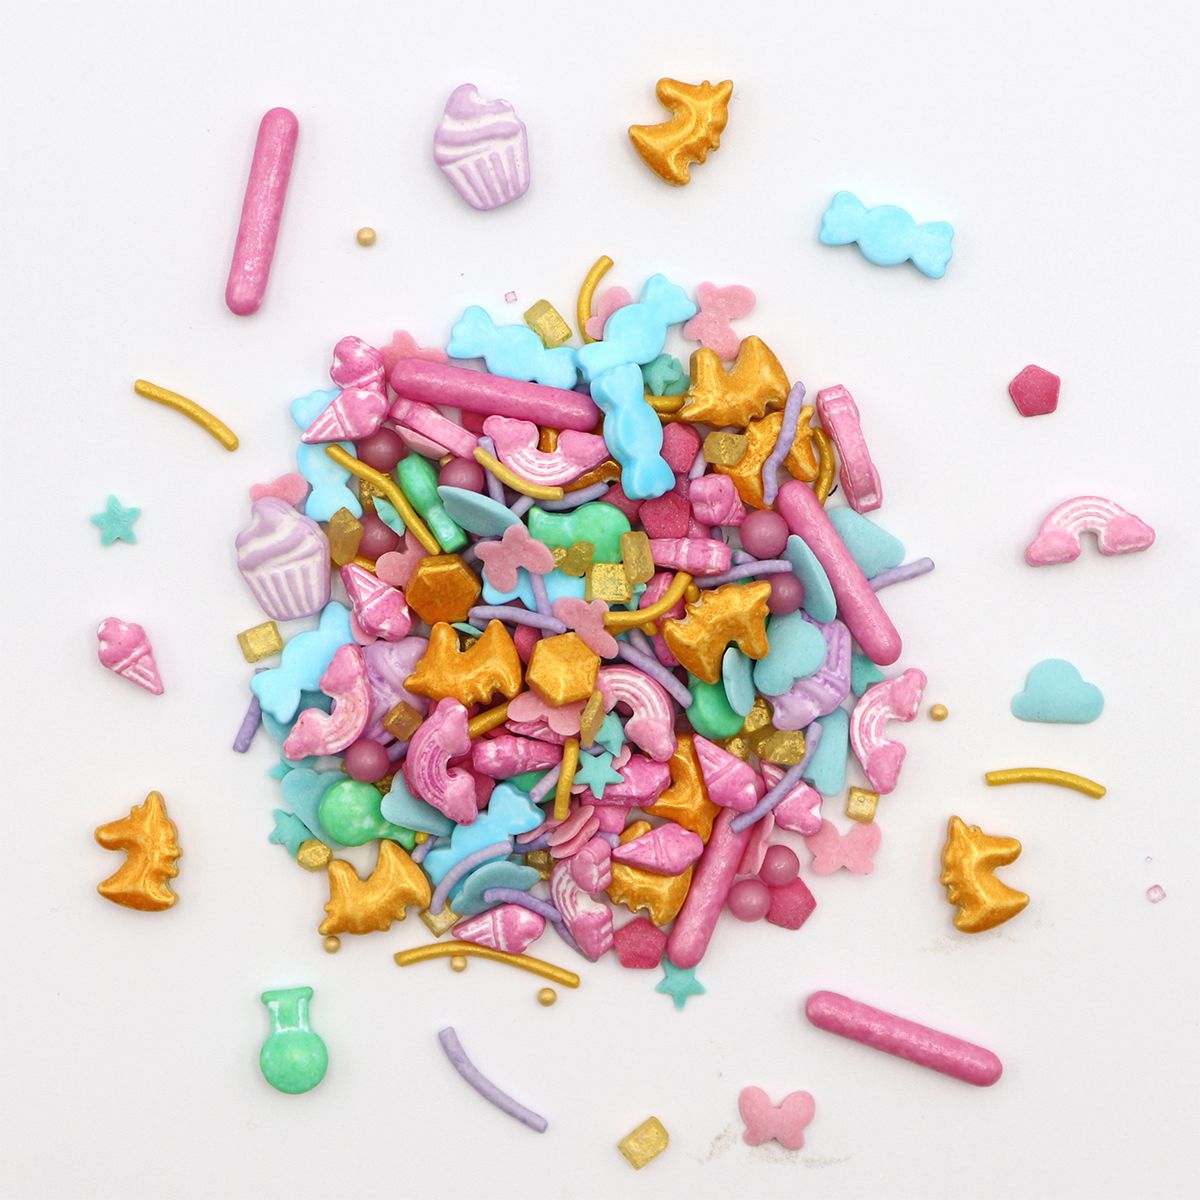  Foto: PME OUT OF THE BOX SPRINKLES - UNICORNO 60gr.